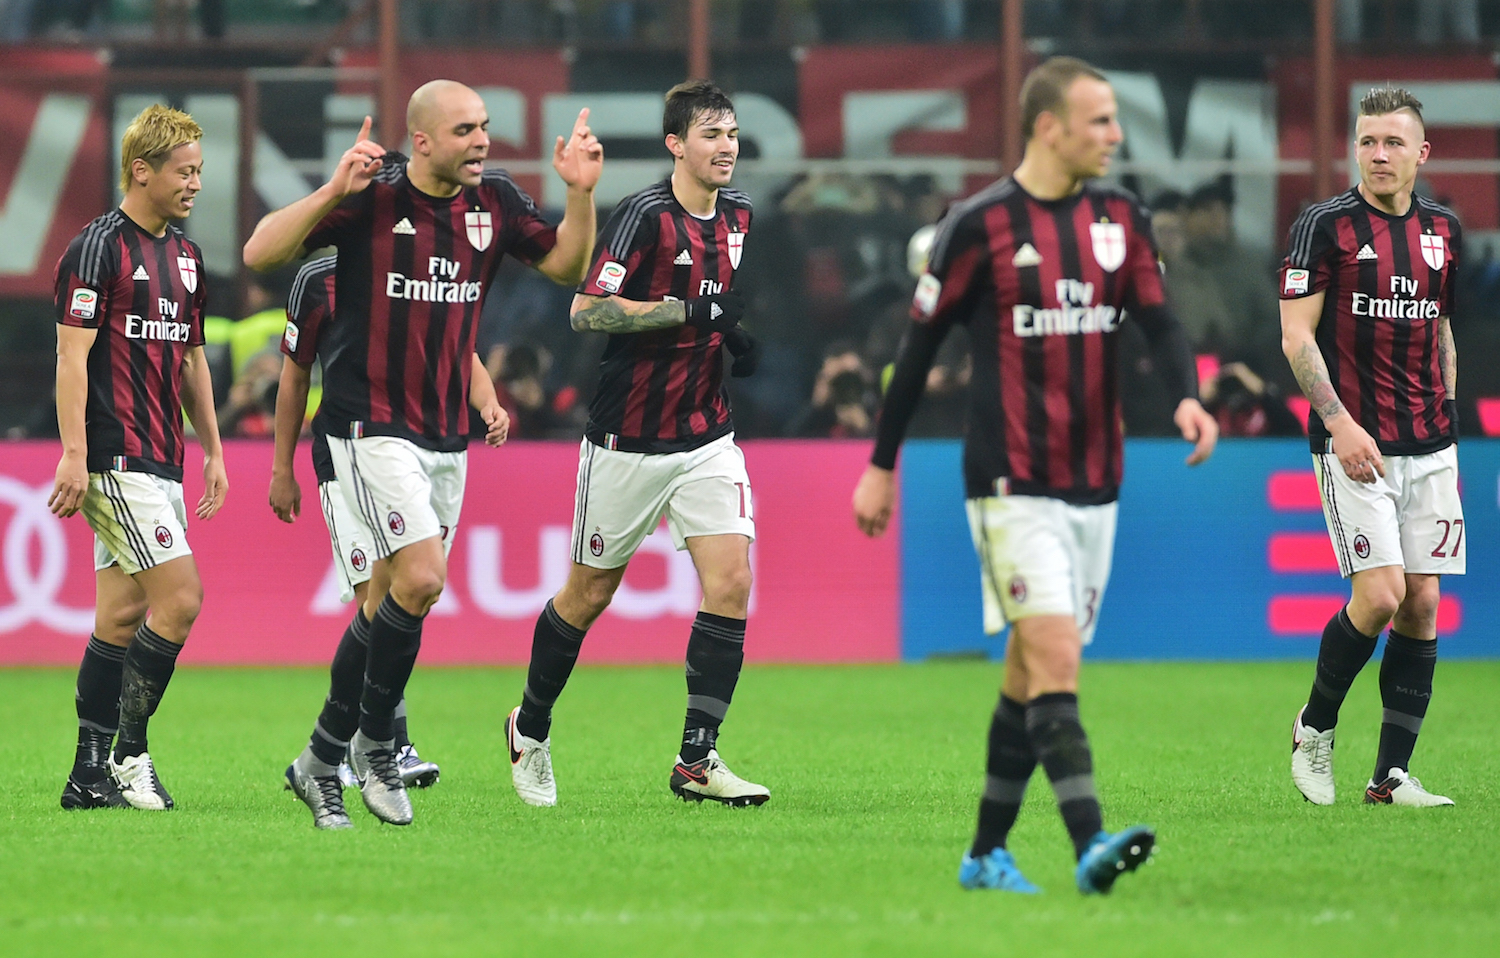 Alex celebrates after scoring in the Derby della Madonnina. | GIUSEPPE CACACE/AFP/Getty Images